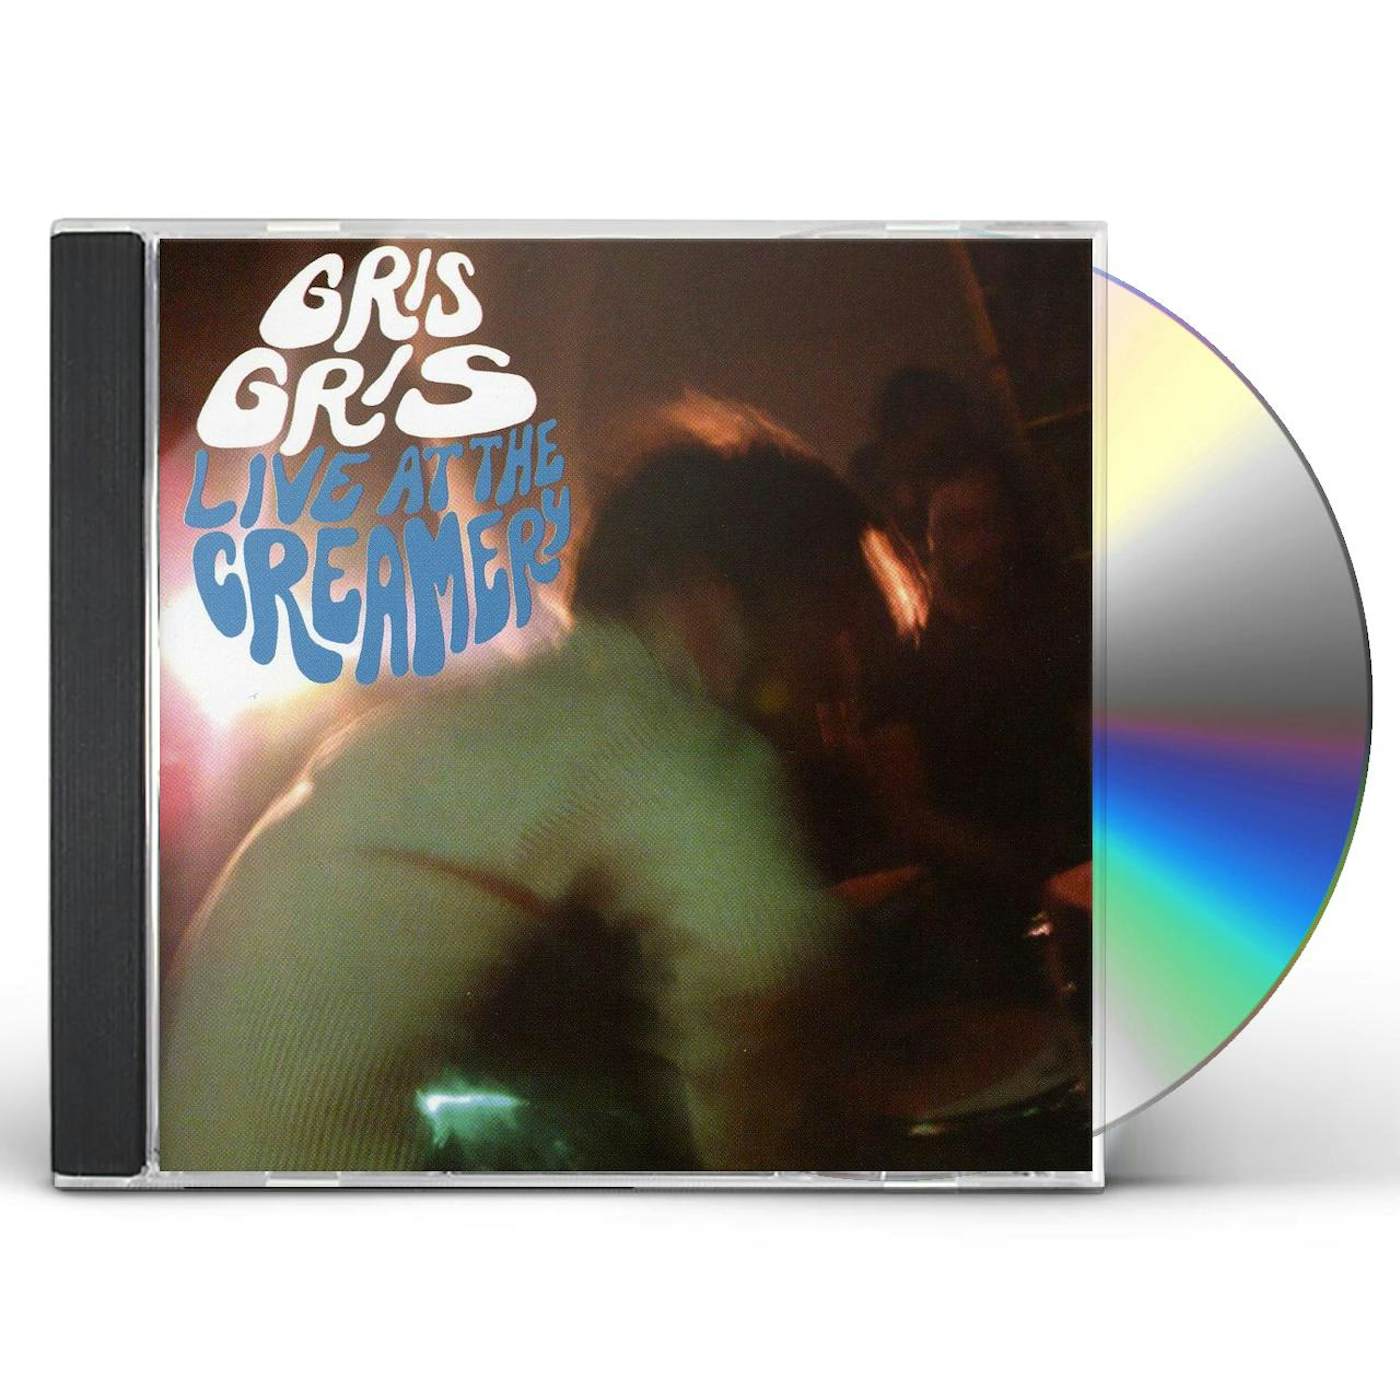 Gris Gris LIVE AT THE CREAMERY CD